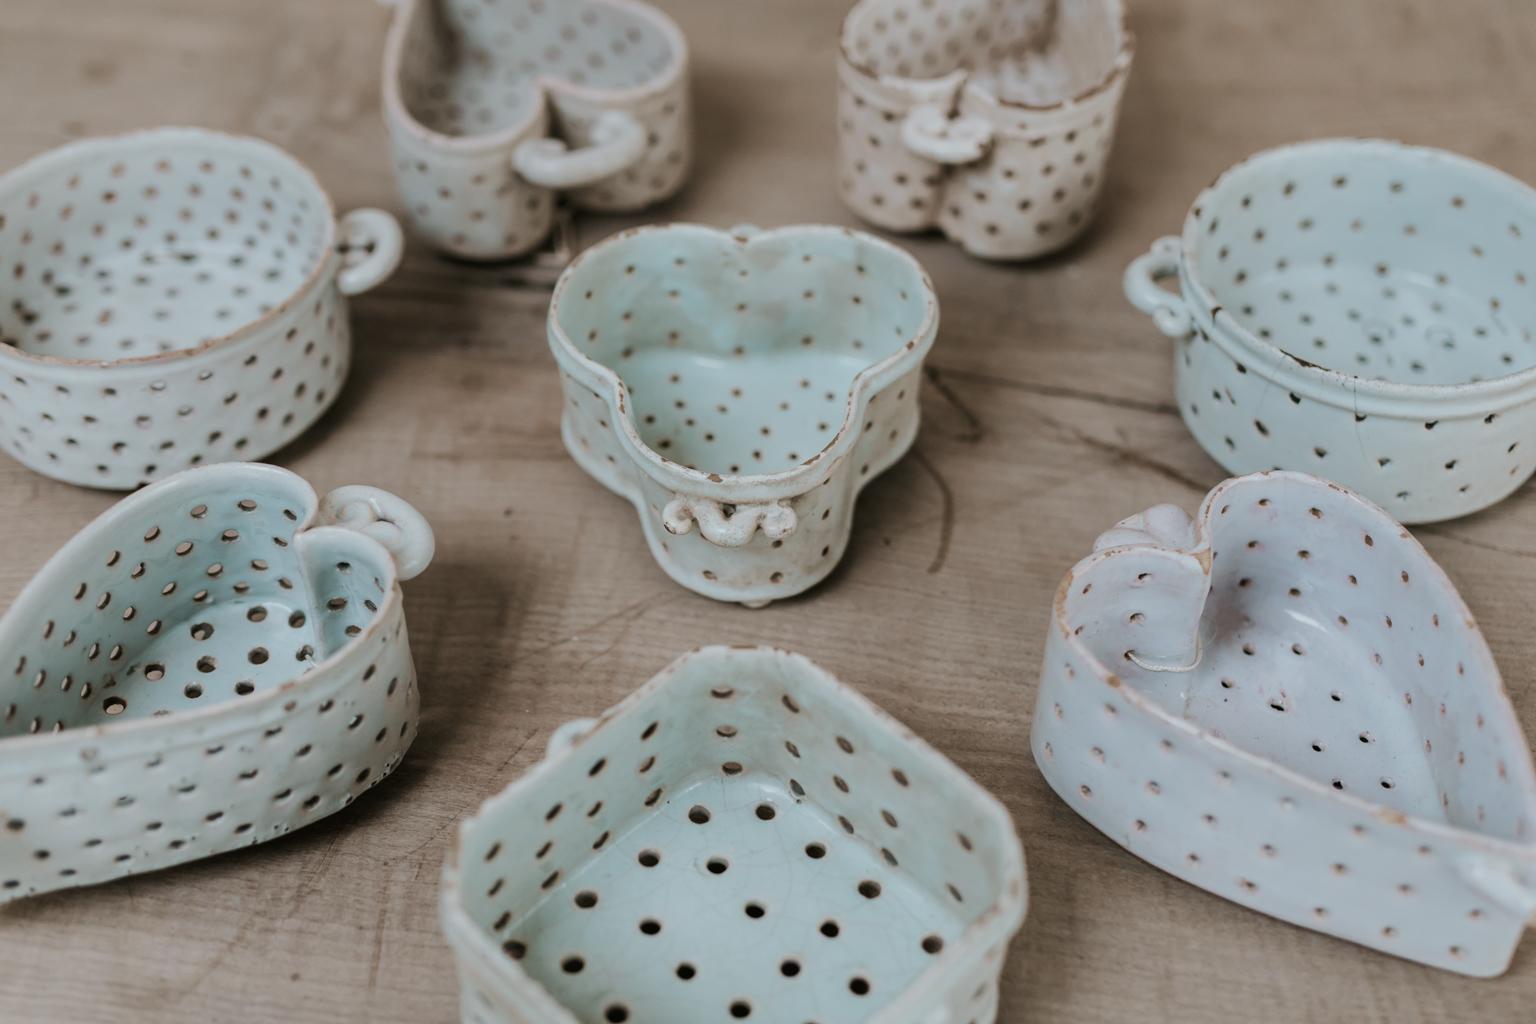 This is a collection of 8 French 18th century porcelain soft cheese moulds, collected by a French antiques dealer over 35 years time,
extremely rare find.